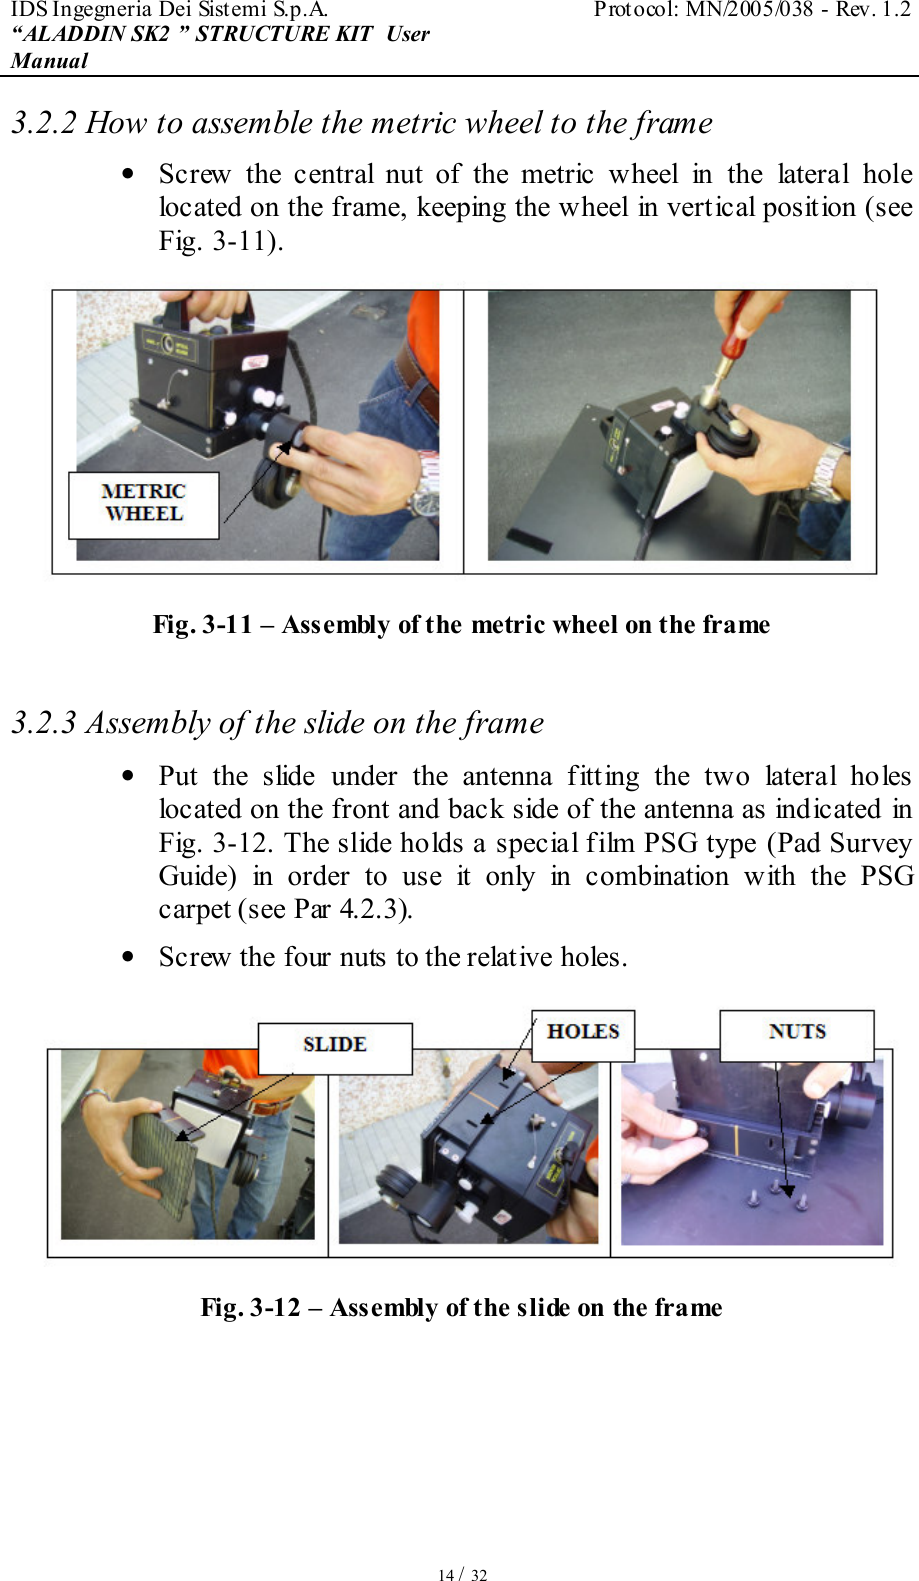 IDS Ingegneria Dei Sistemi S.p.A.  Protocol: MN/2005/038 - Rev. 1.2 “ALADDIN SK2 ” STRUCTURE KIT  User Manual   14 / 32 3.2.2 How to assemble the metric wheel to the frame •  Screw  the  central  nut  of  the  metric  wheel  in  the  lateral  hole located on the frame, keeping the wheel in vertical position (see Fig. 3-11).  Fig. 3-11 – Assembly of the metric wheel on the frame  3.2.3 Assembly of the slide on the frame •  Put  the  slide  under  the  antenna  fitting  the  two  lateral  holes located on the front and back side of the antenna as indicated in Fig. 3-12. The slide holds a special film PSG type (Pad Survey Guide)  in  order  to  use  it  only  in  combination  with  the  PSG carpet (see Par 4.2.3). •  Screw the four nuts to the relative holes.  Fig. 3-12 – Assembly of the slide on the frame    